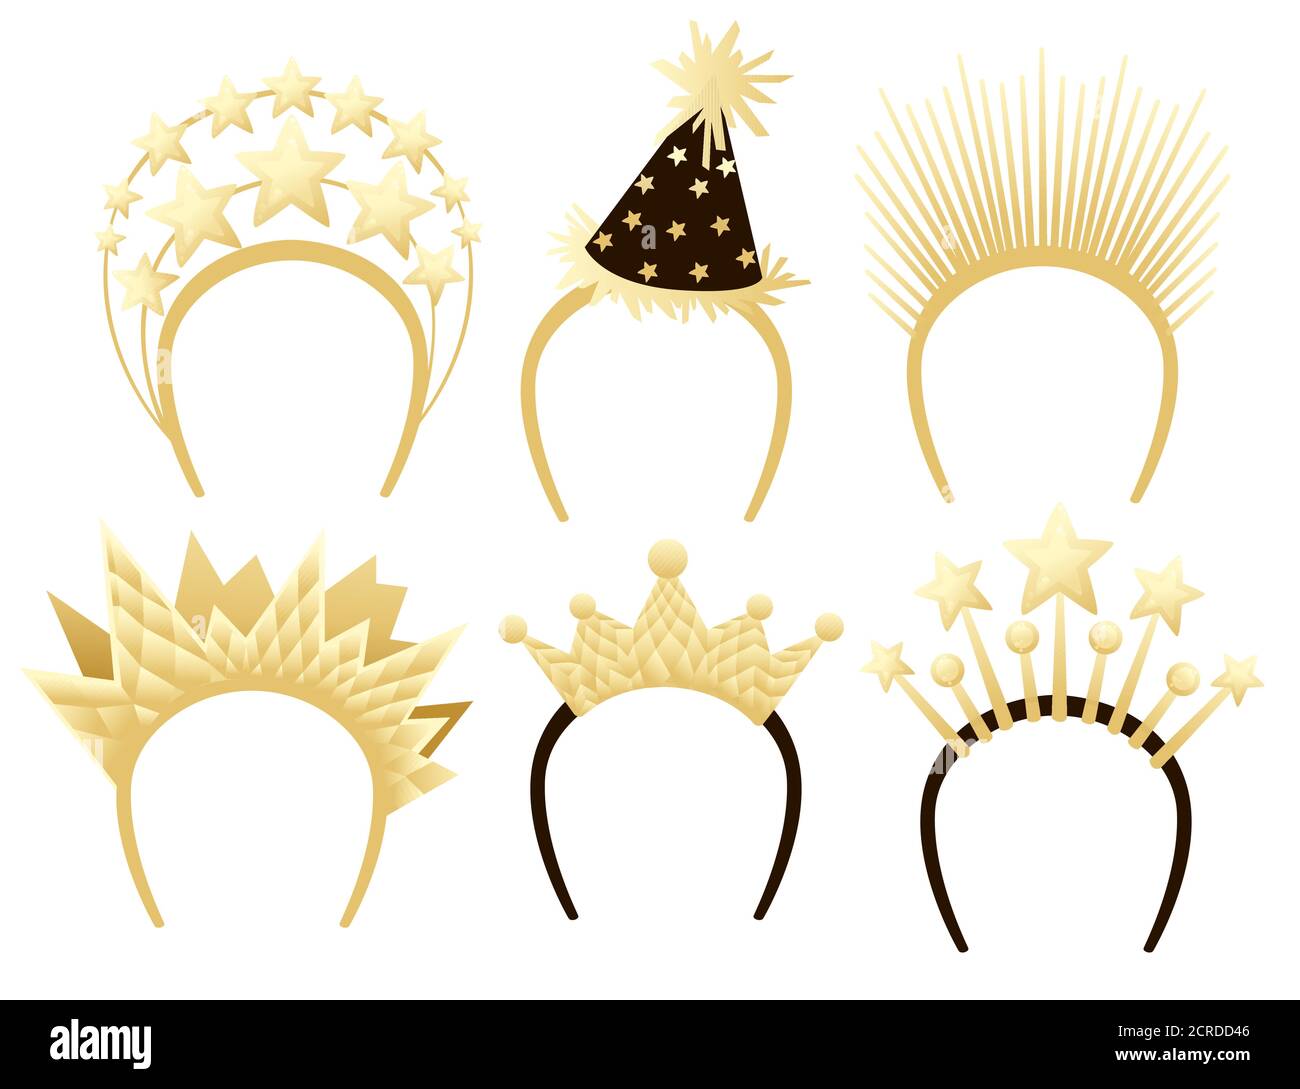 Collection of holiday head jewelry hoop crown stars flat vector illustration on white background Stock Vector